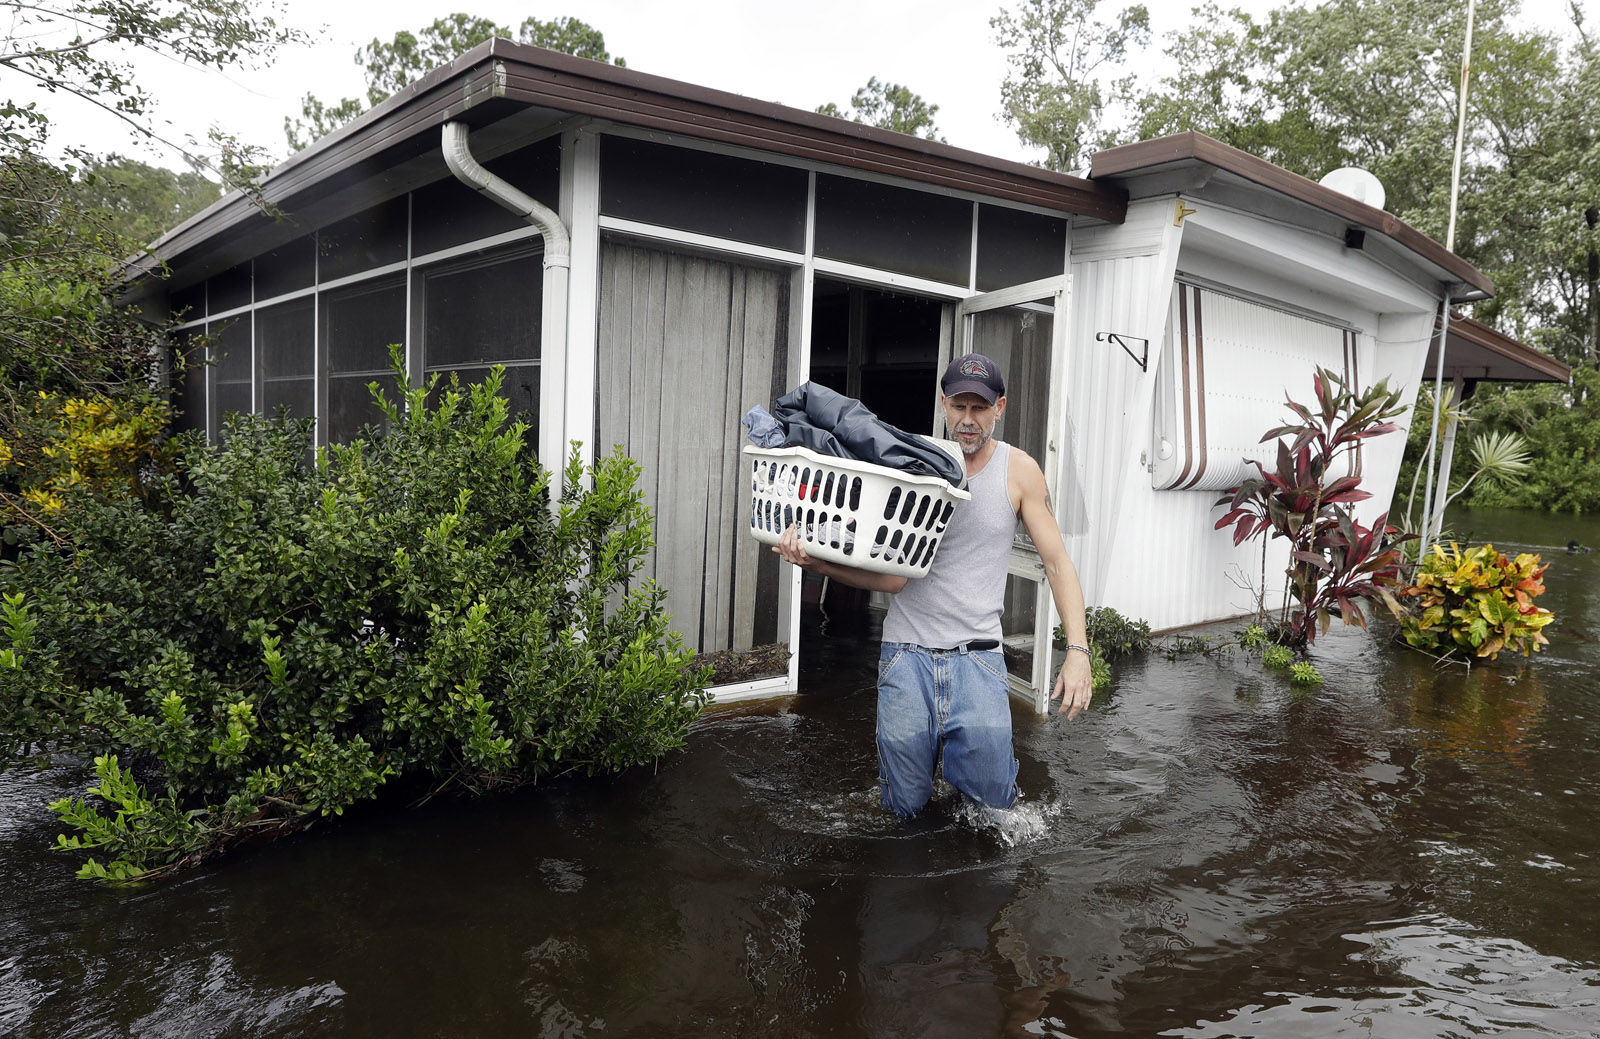 Grady Howell, of Plant City, Fla., helps a friend salvage items from a flooded mobile home Monday, Sept. 11, 2017, after Hurricane Irma moved through the area in Lakeland, Fla. (AP Photo/Chris O'Meara)